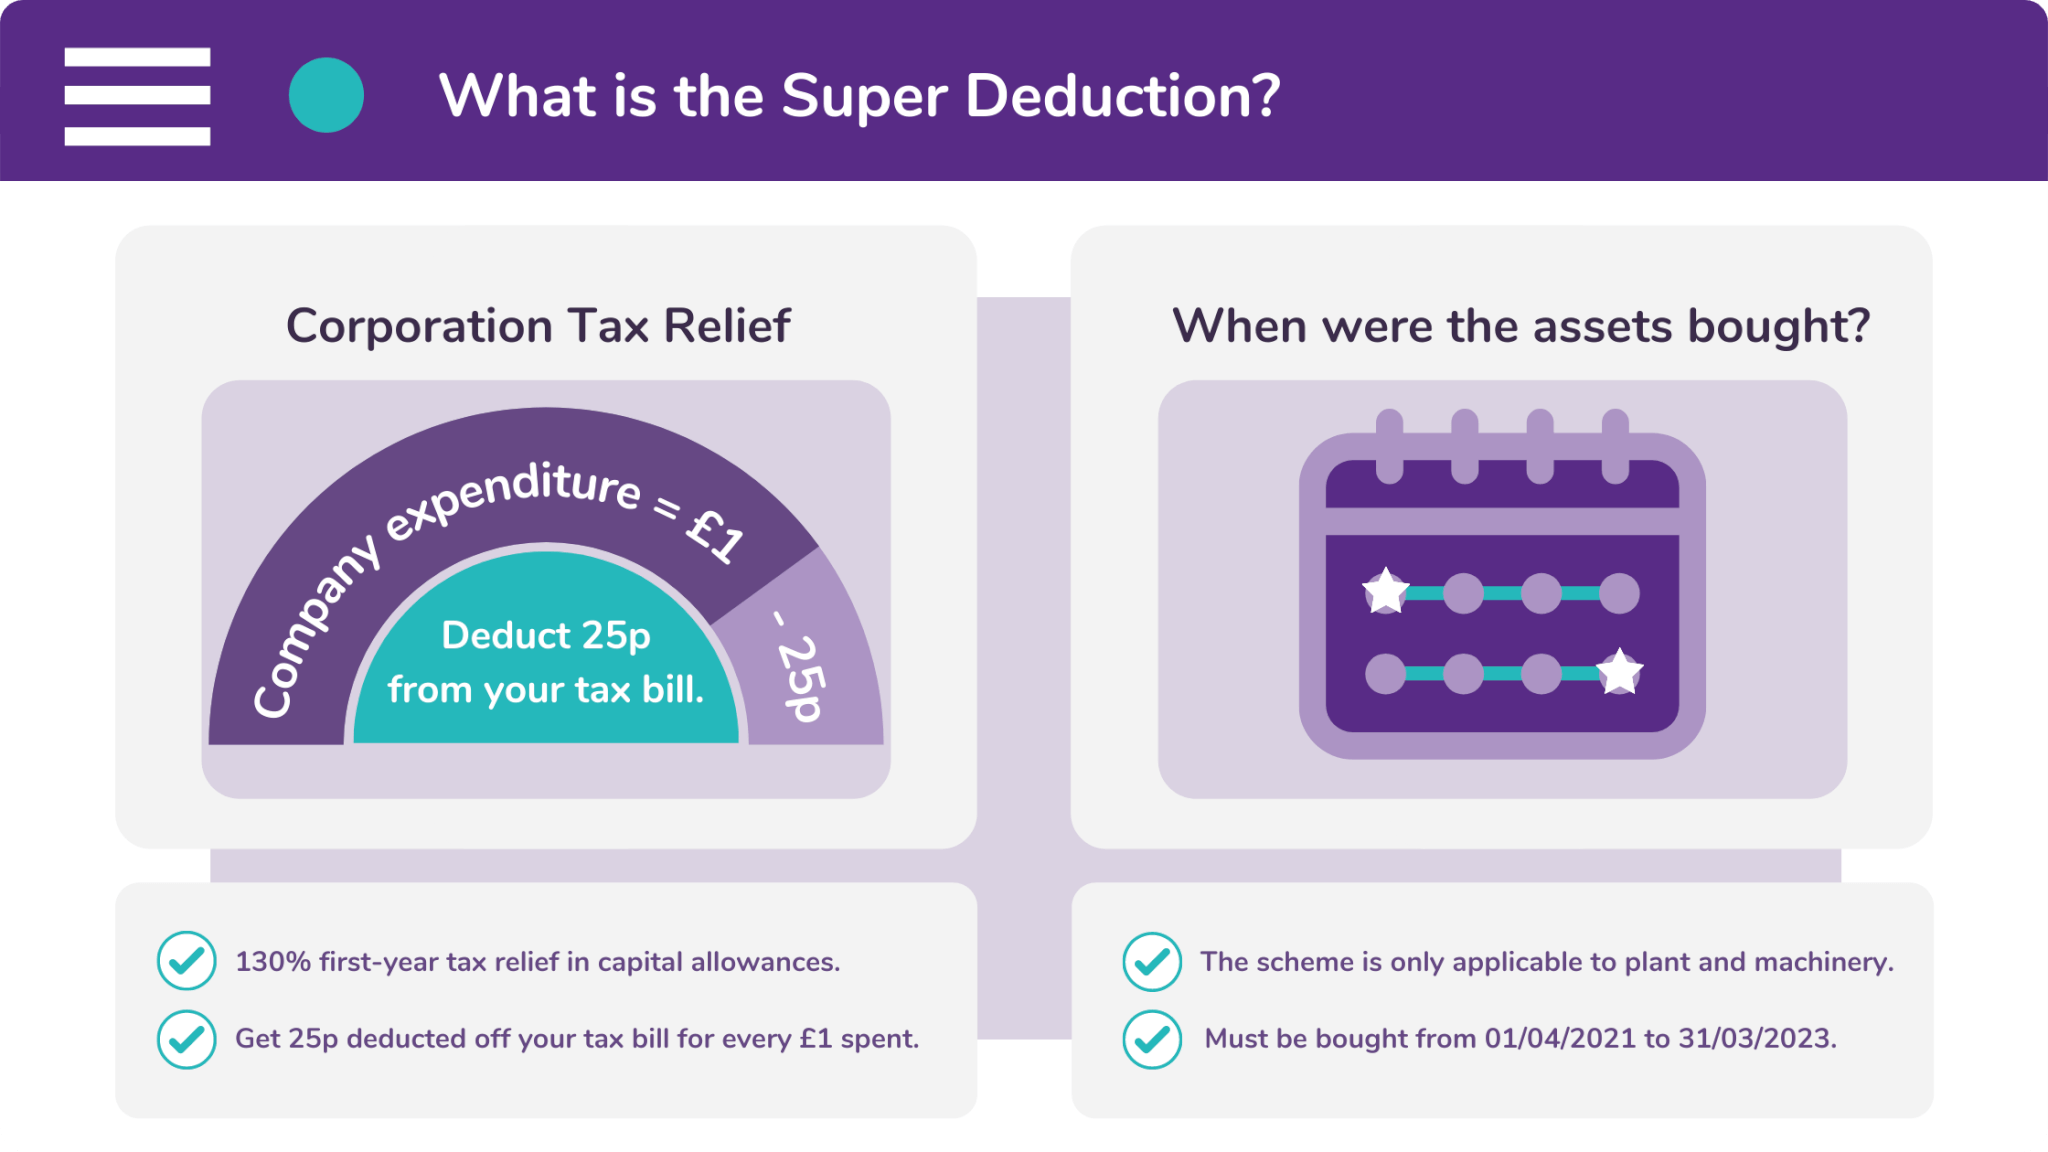 The Super Deduction is a government scheme where 25p is knocked off your tax bill for every £1 you spend.